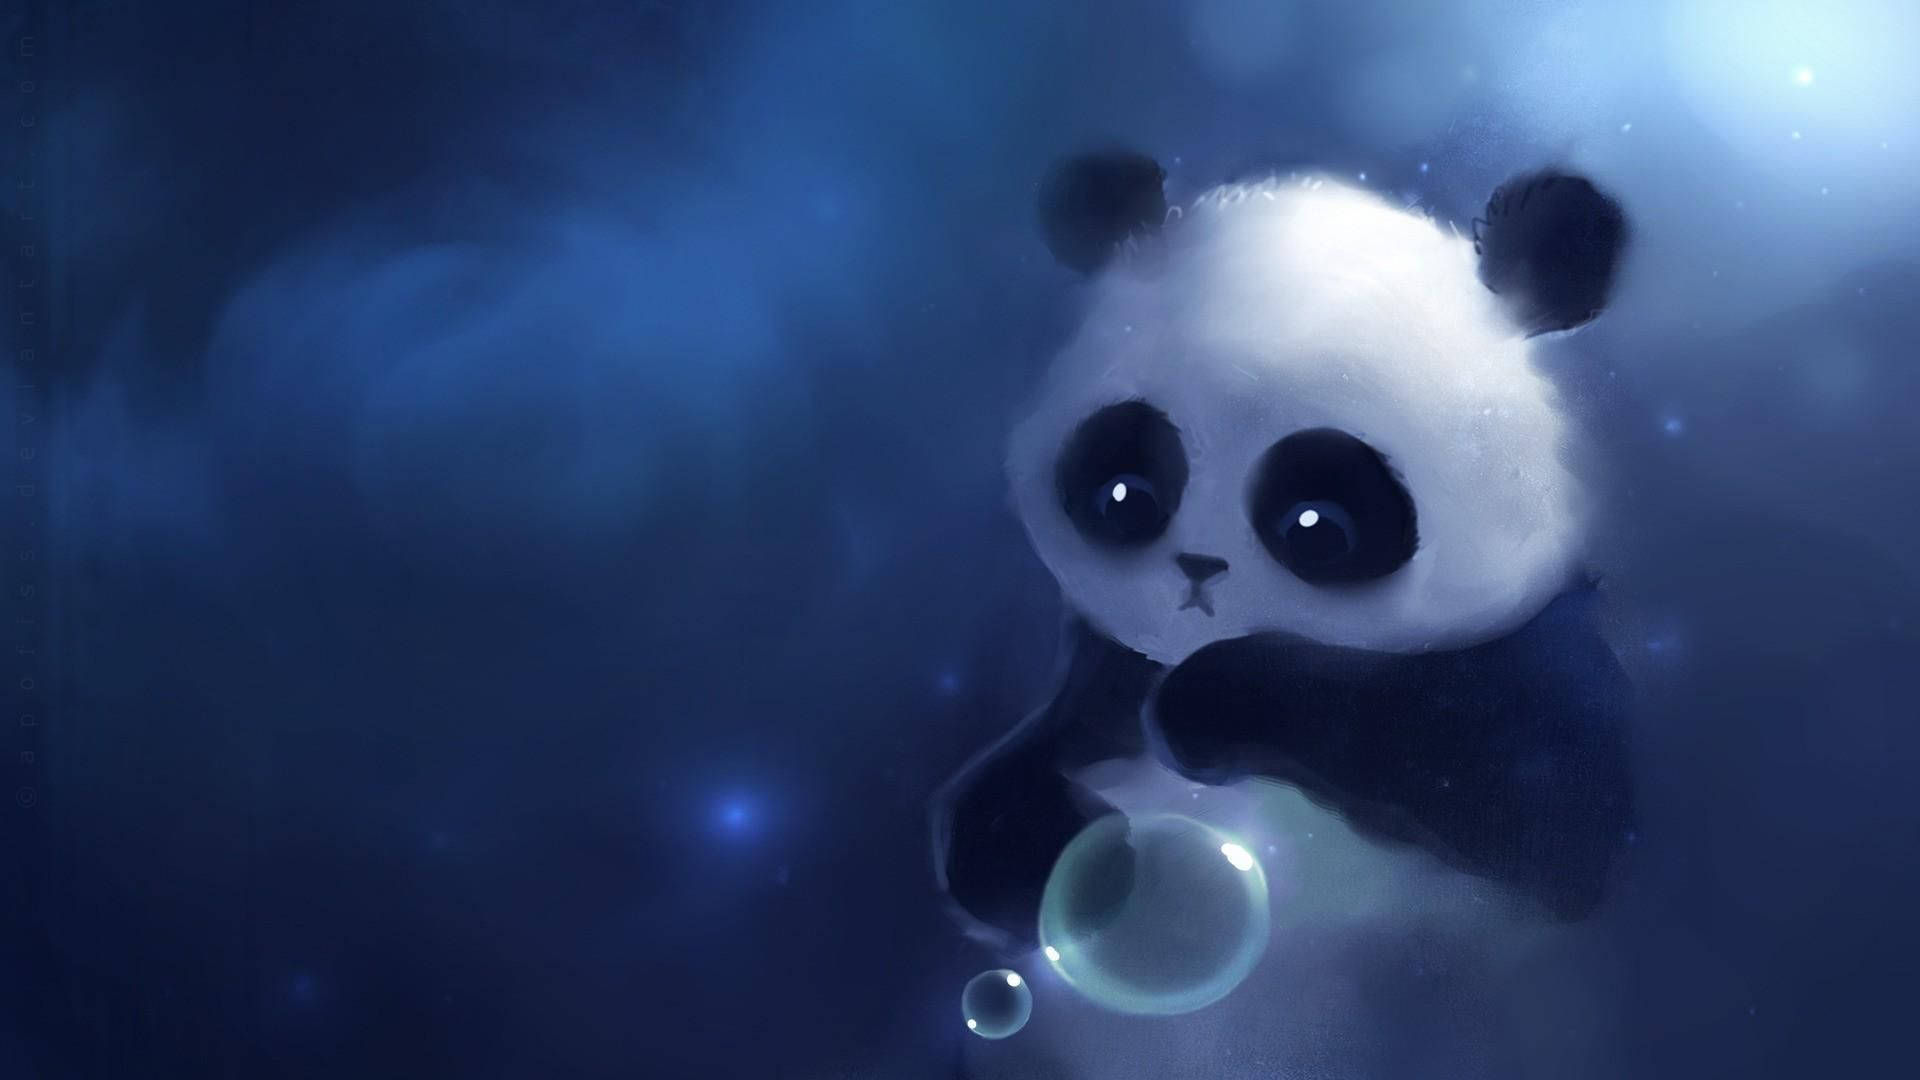 Cute Panda With Lonely Face